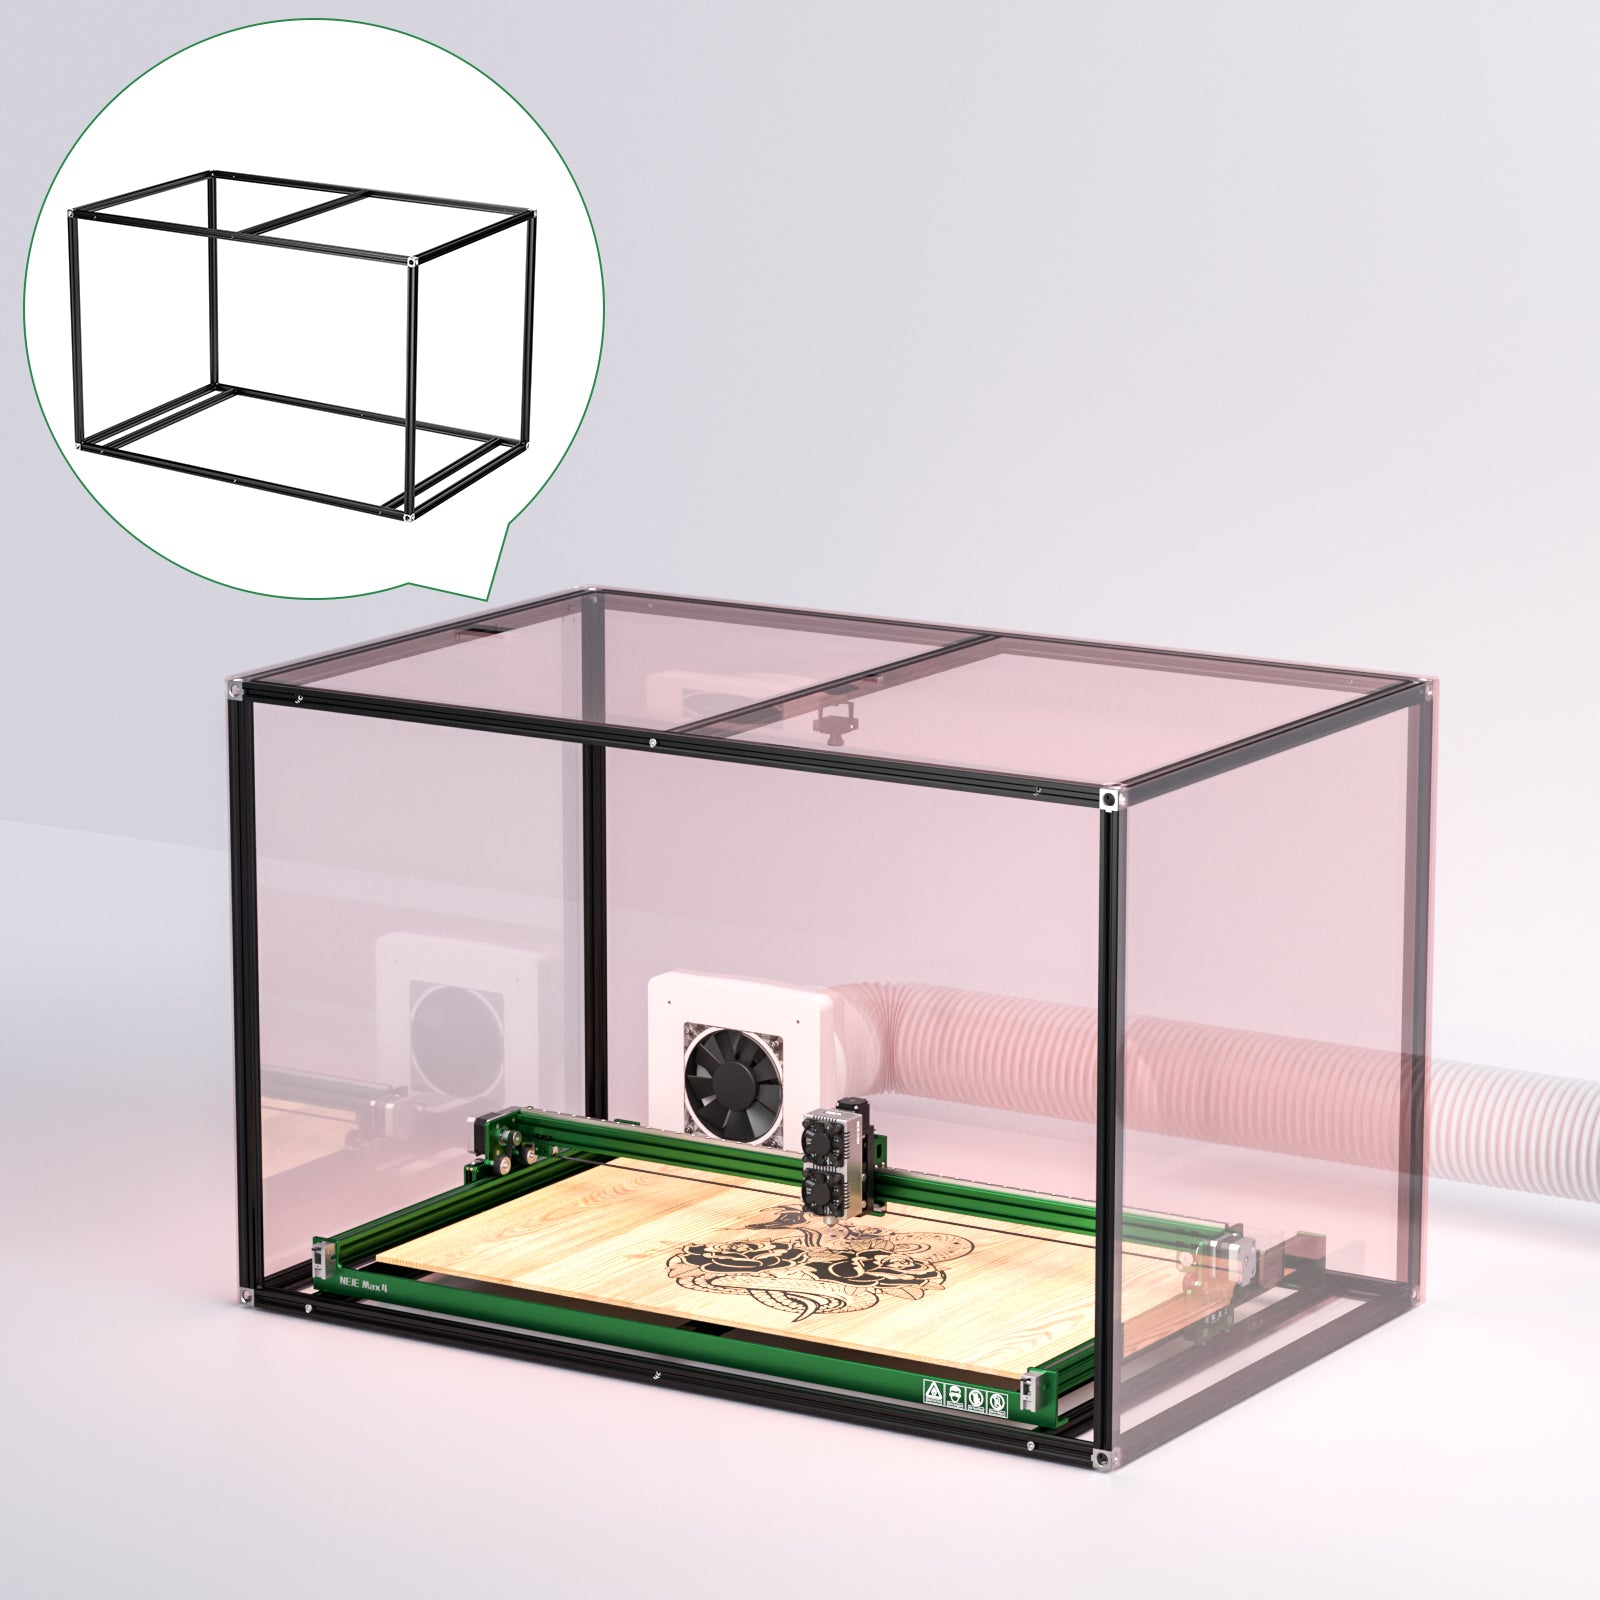 NEJE Laser Engraver Enclosure Box Frame for Protection(Without Acrylic Board)